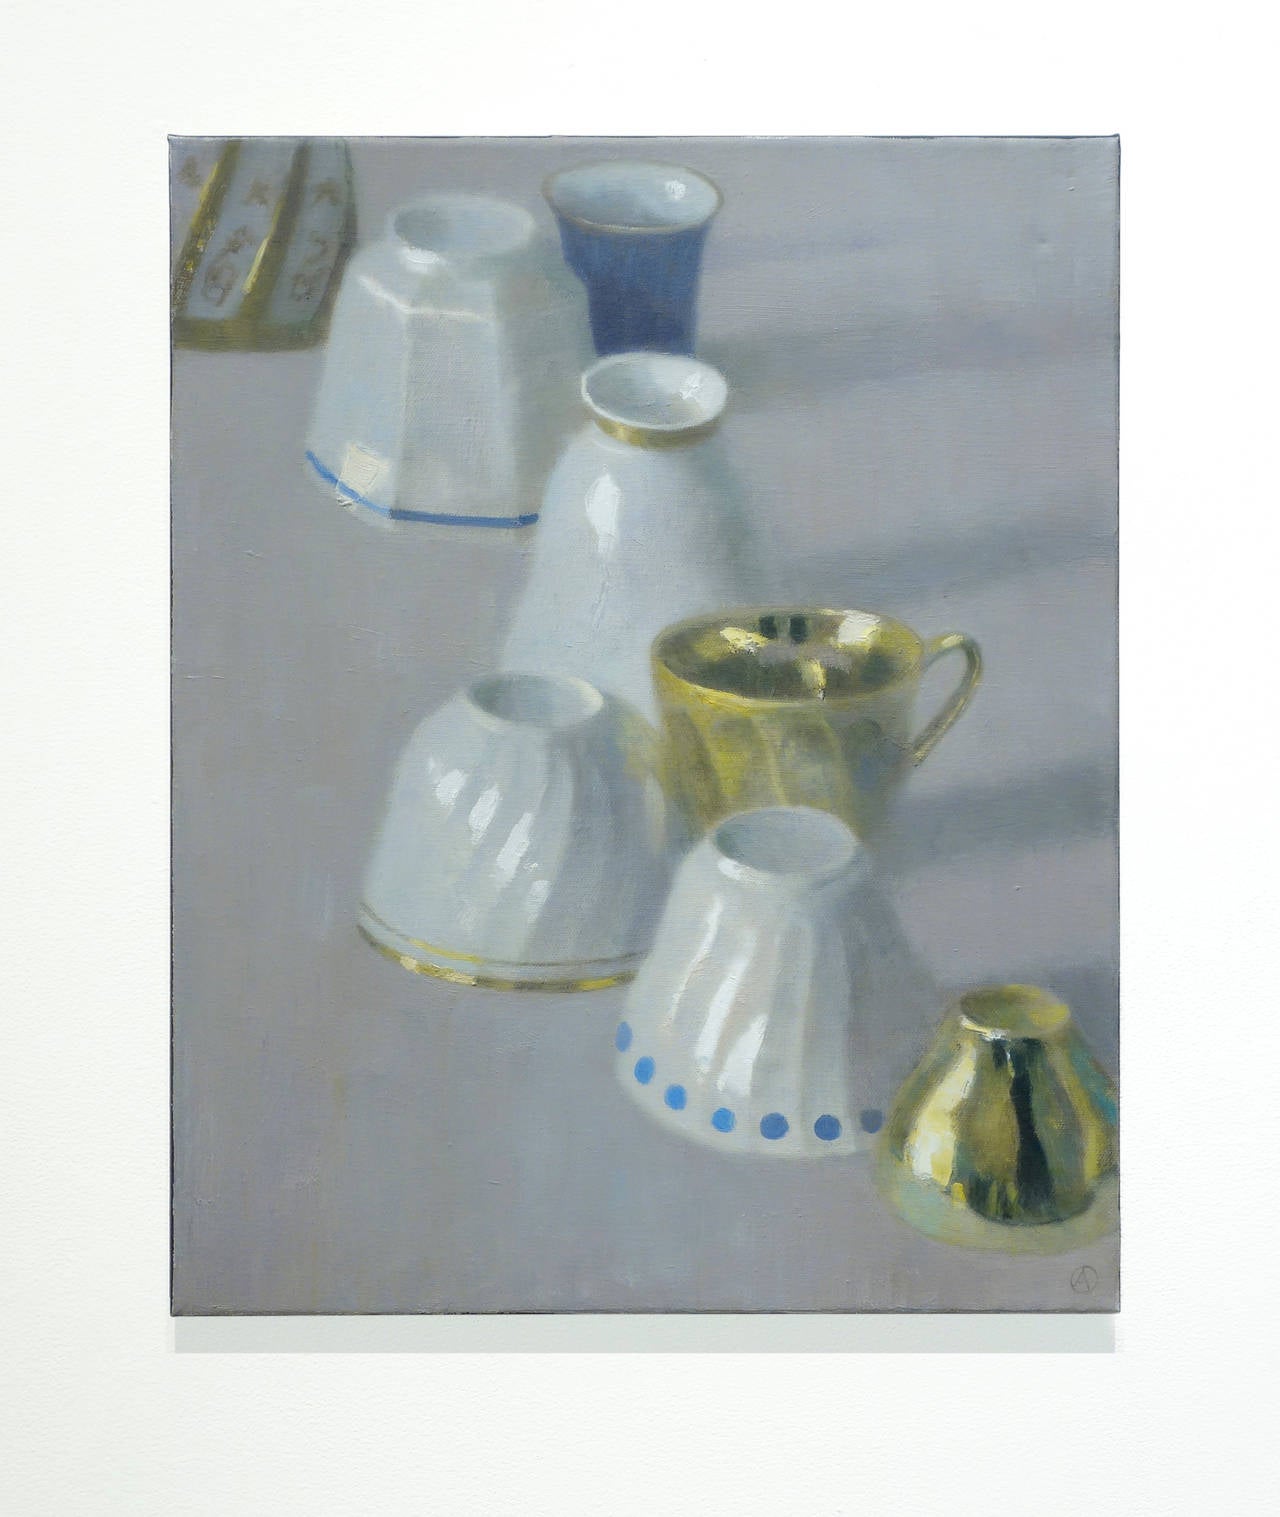 UPSIDE DOWN, still life of cups on table, upright and upside down, porcelain - Painting by Olga Antonova